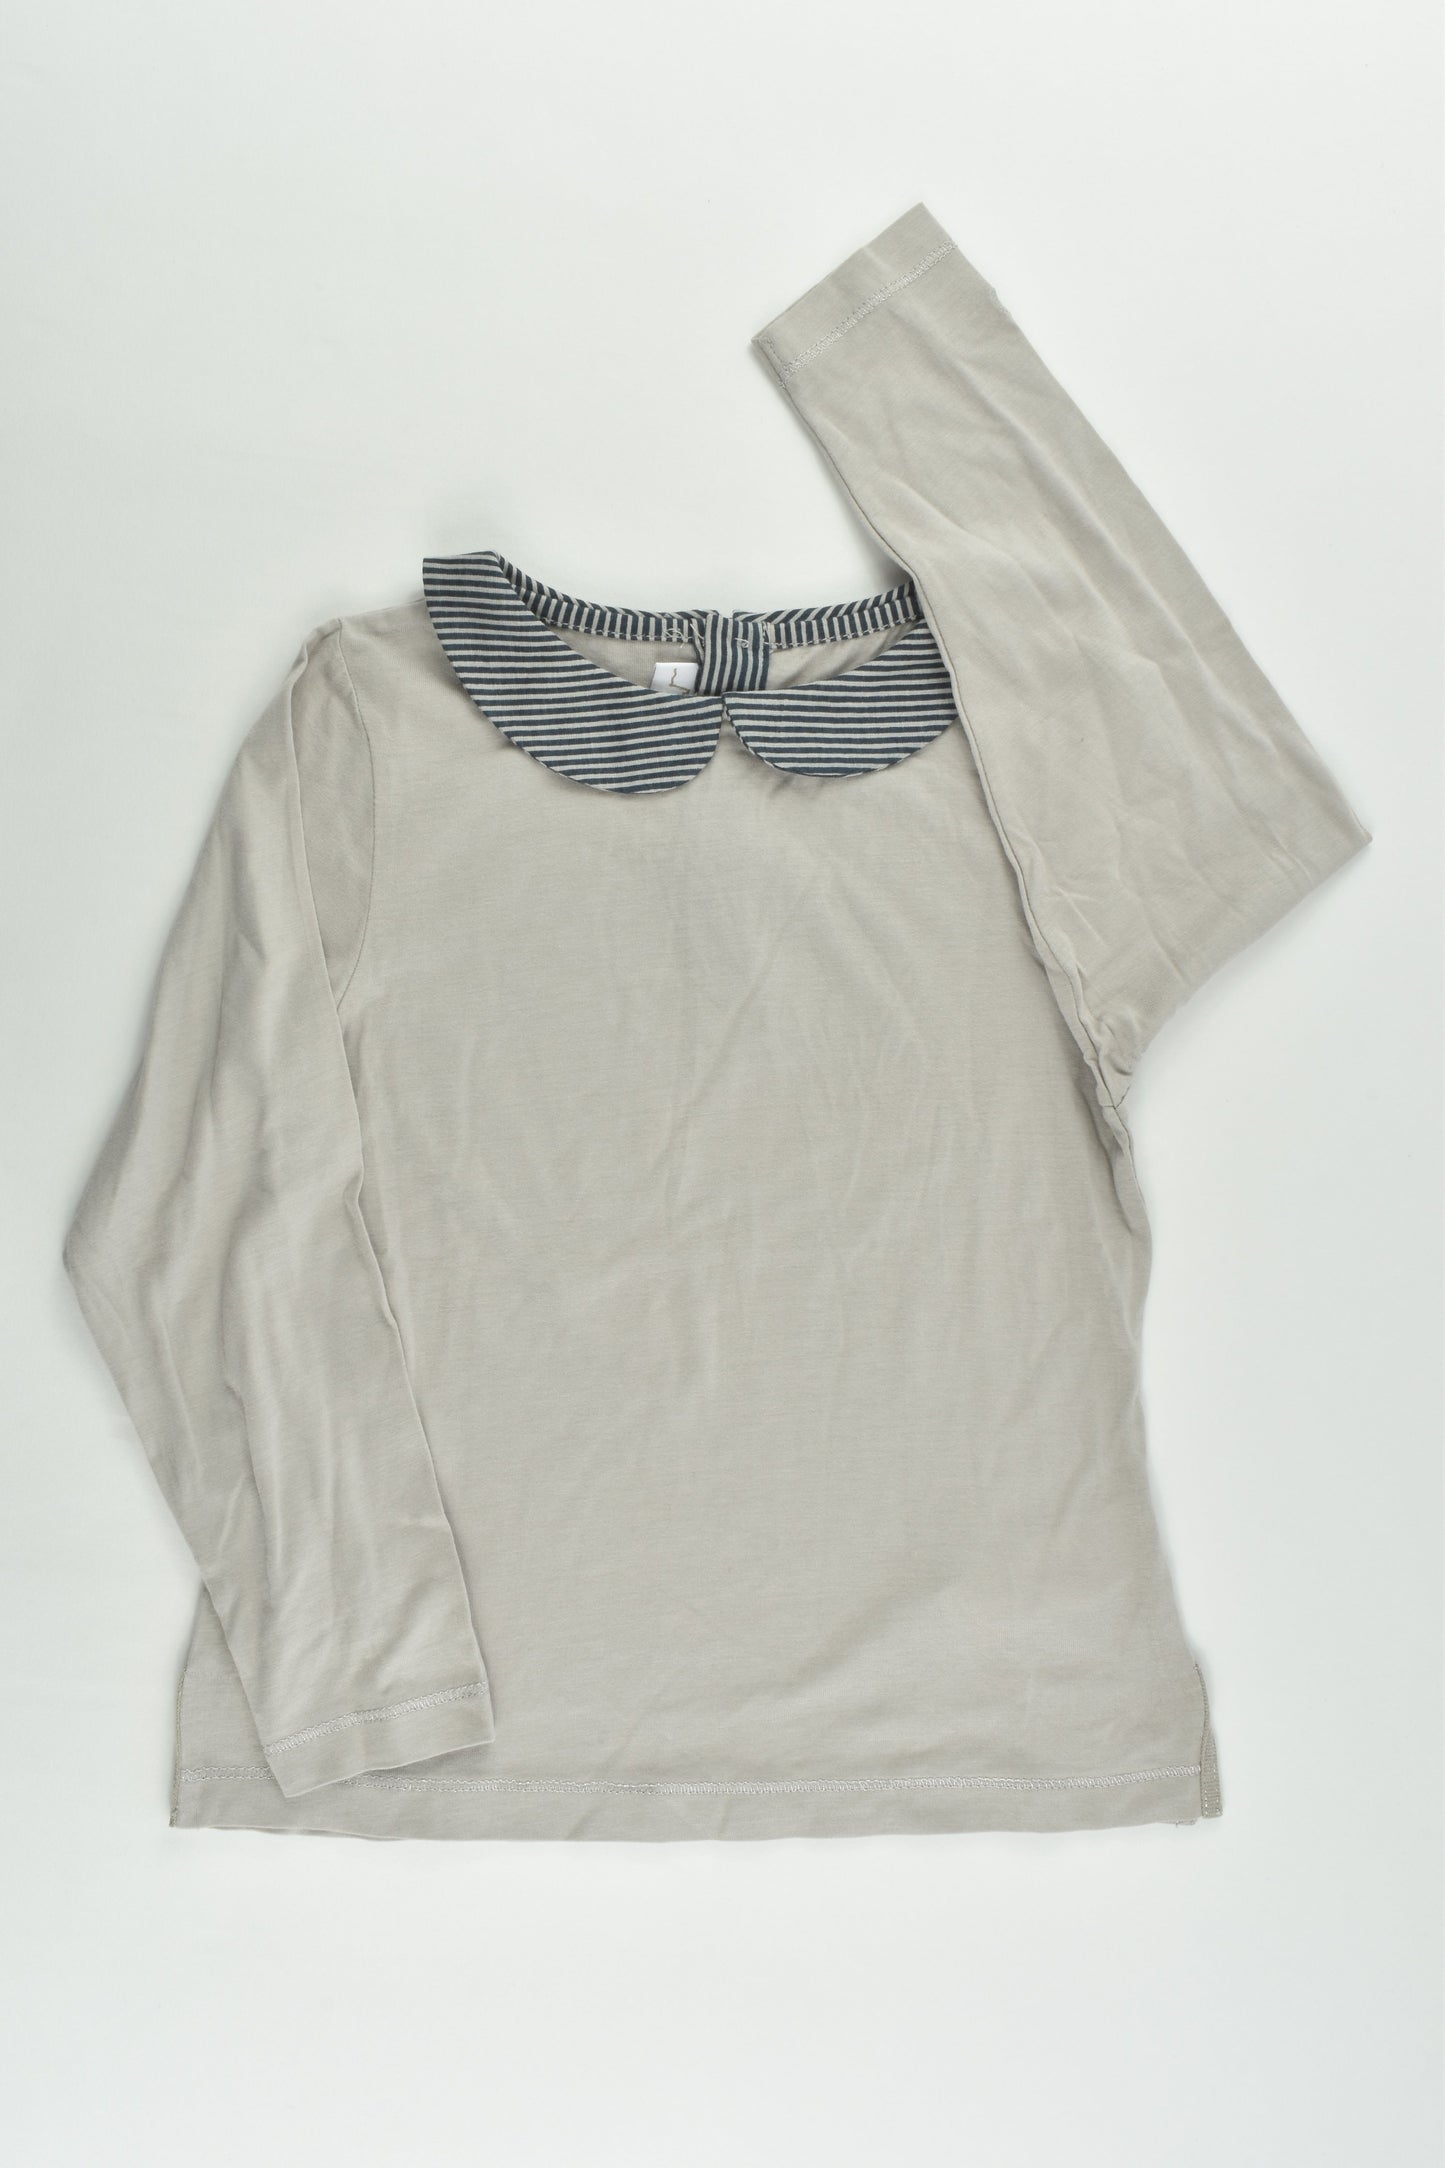 NEW Château de Sable (France) Size 4 Bamboo/Cotton Collared Top